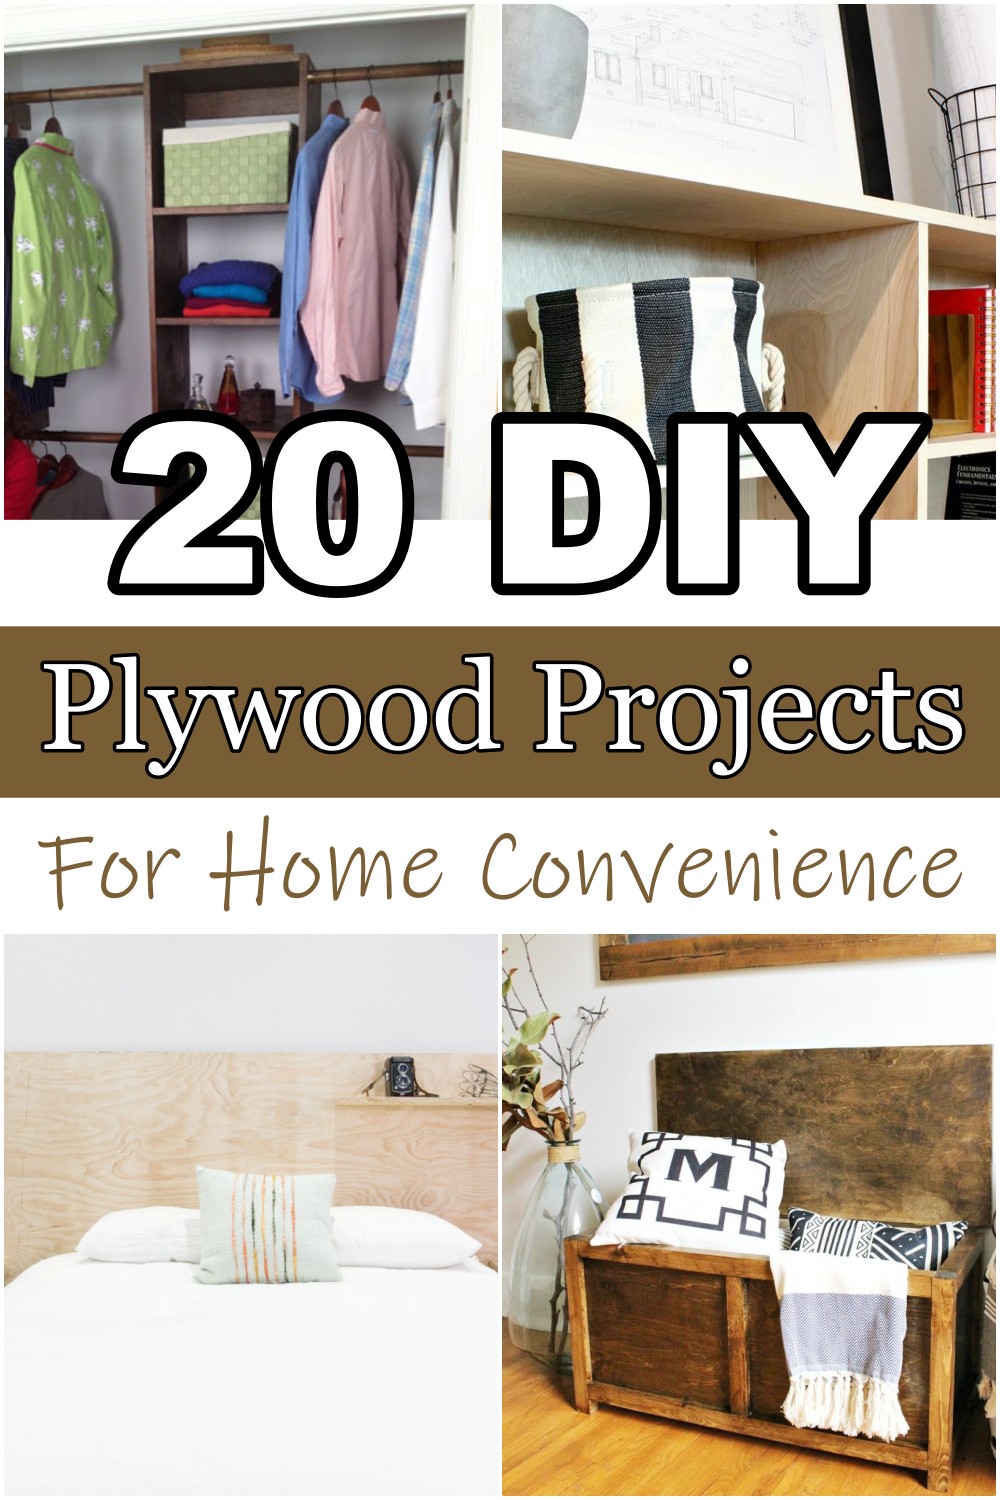 20 DIY Plywood Projects For Home Convenience